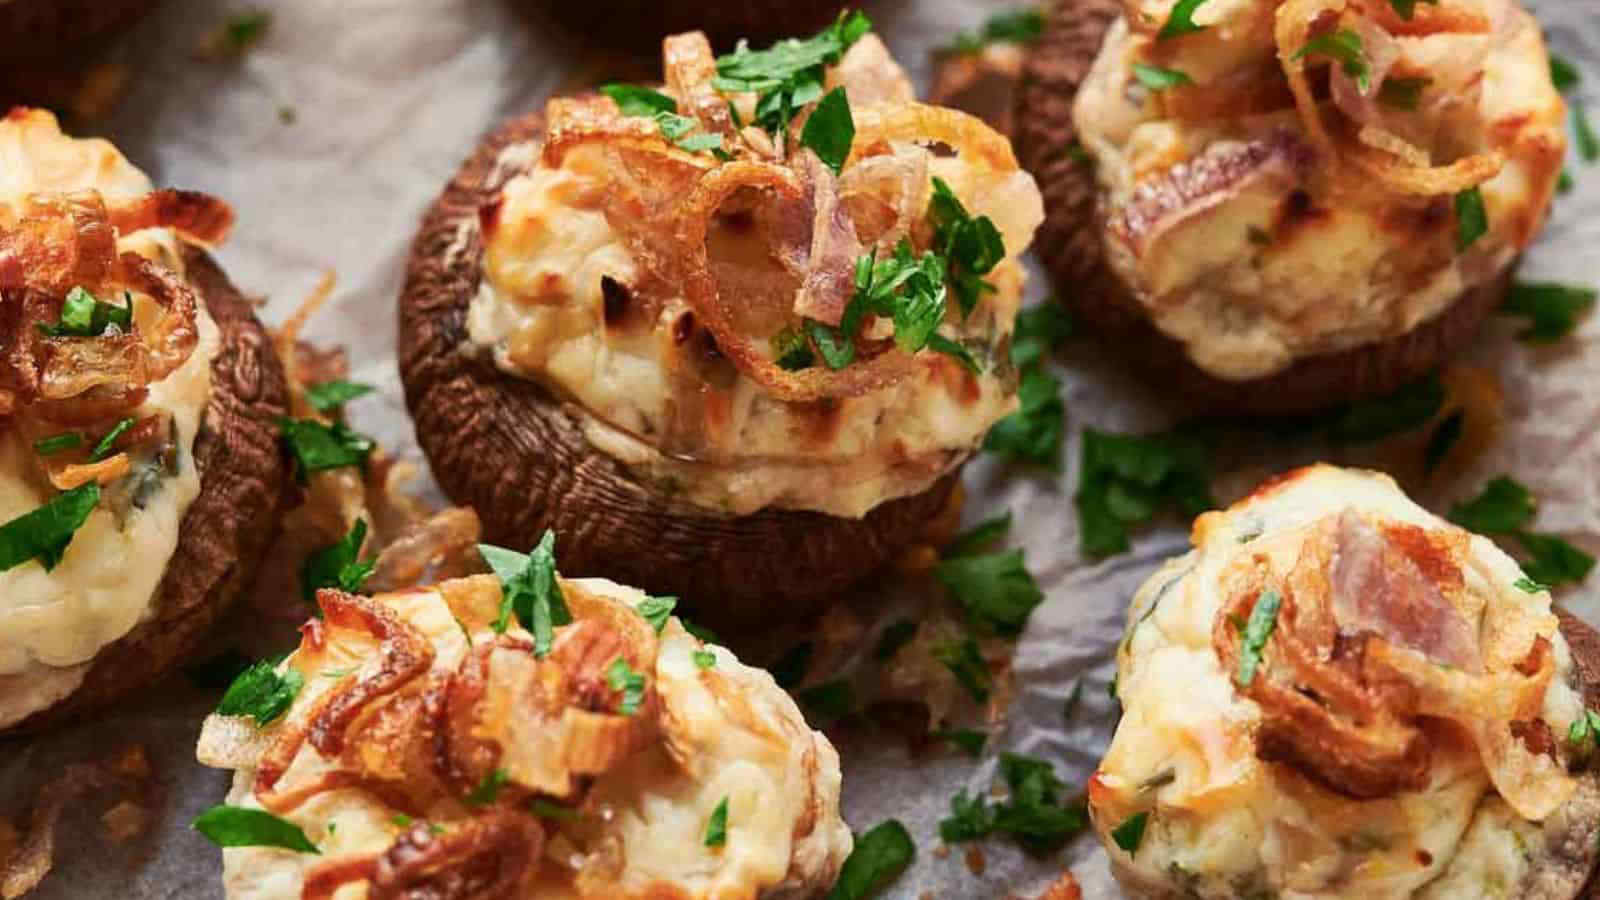 That Good Appetizers: 13 Recipes That'll Knock Your Socks Off